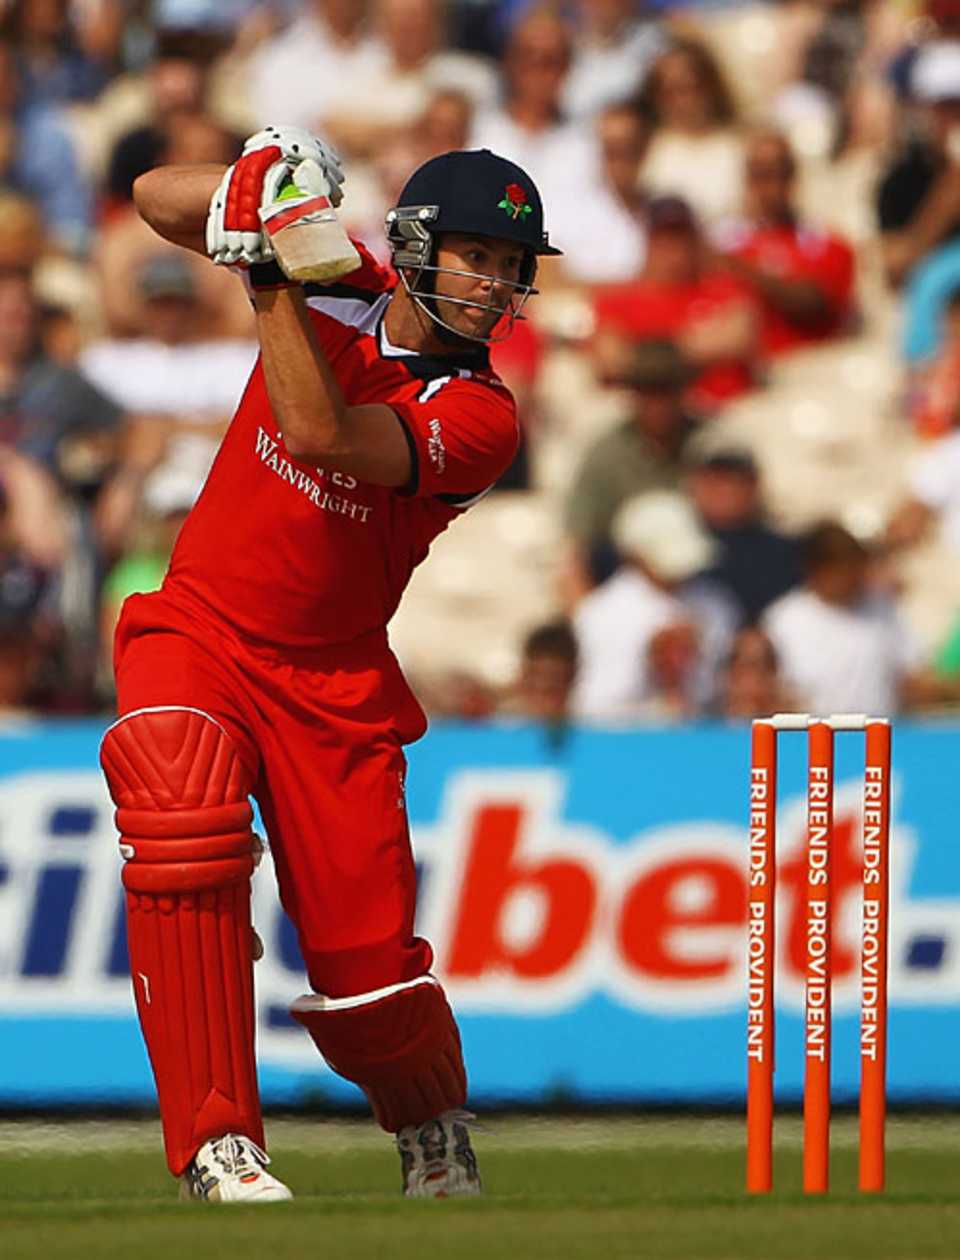 Tom Smith led Lancashire's chase with a calmly-constructed half-century